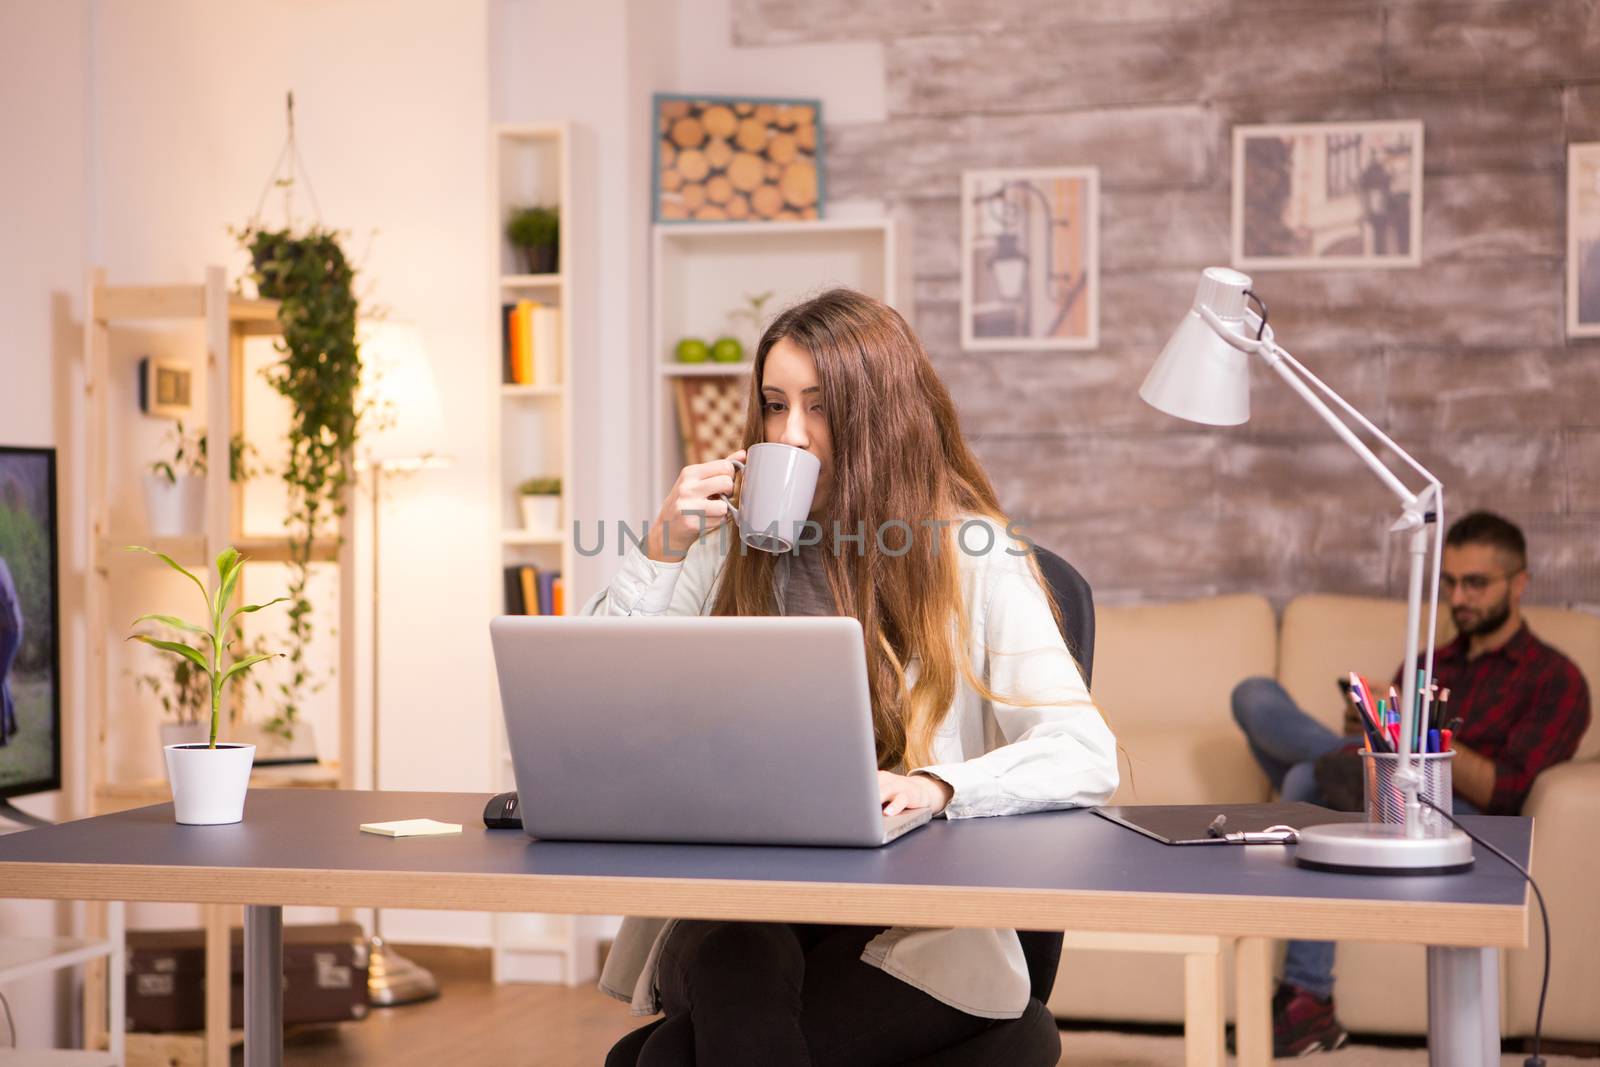 Girl taking a sip of coffee while working on laptop in home office by DCStudio